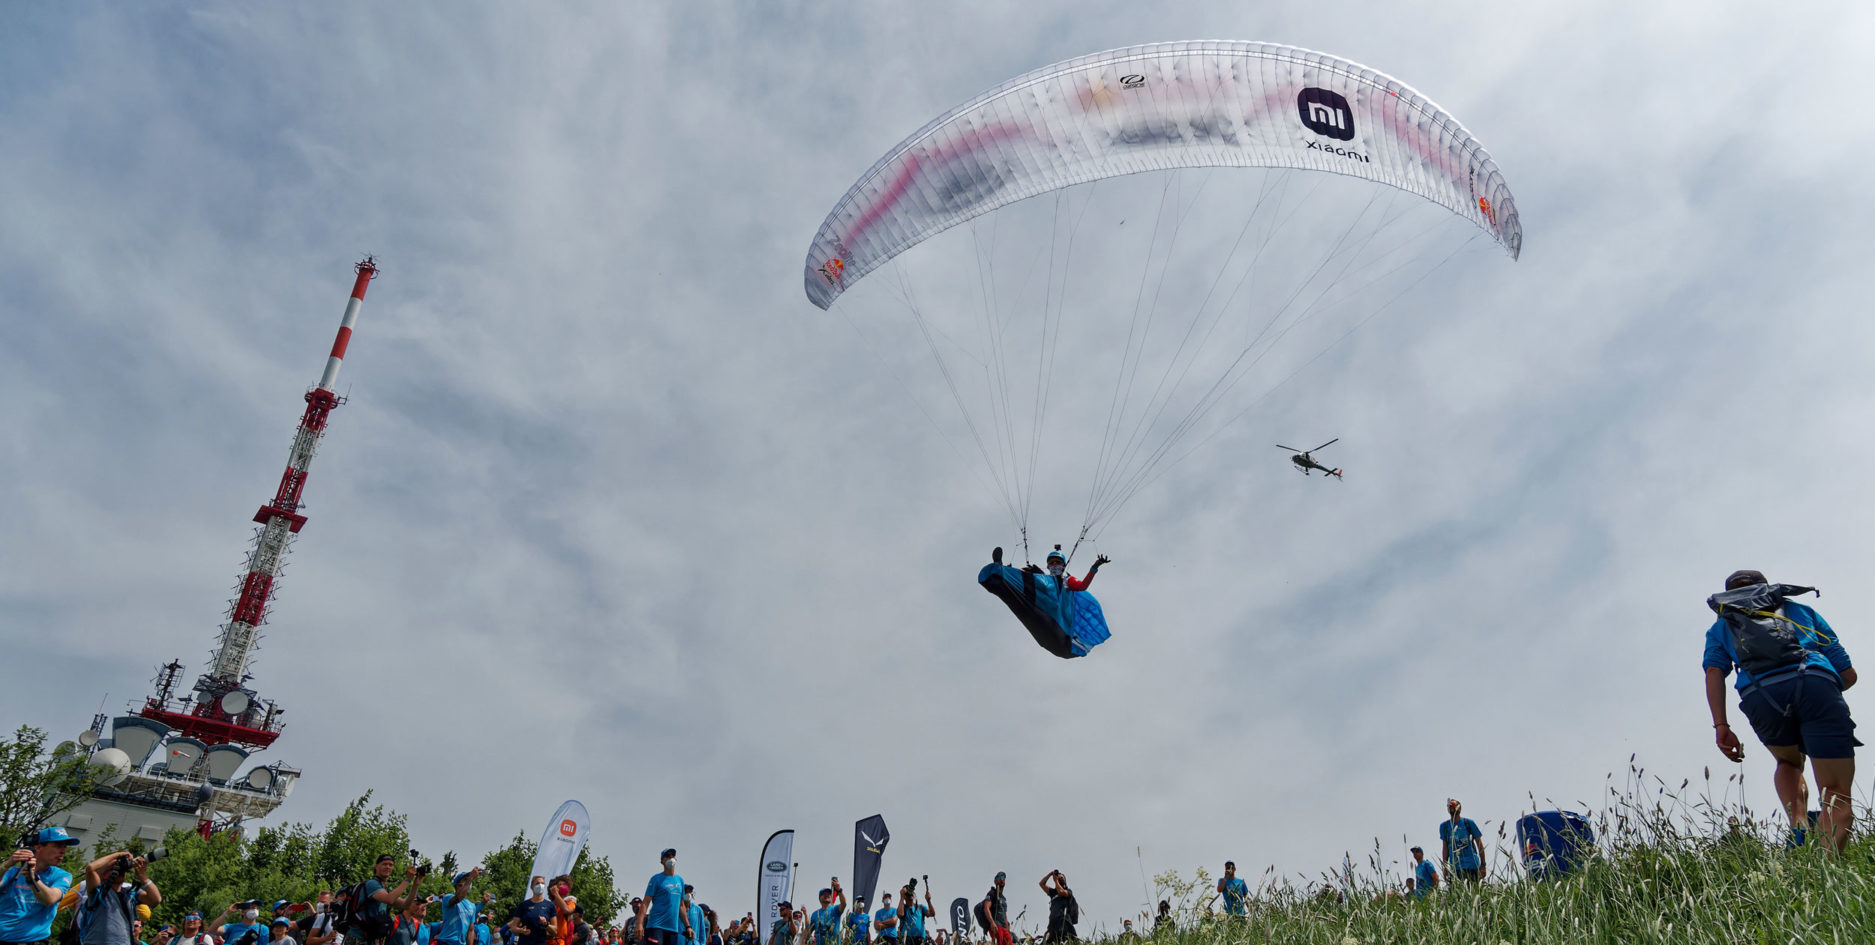 Launching from the Gaisberg on Day 1 of the Red Bull X-Alps 2021